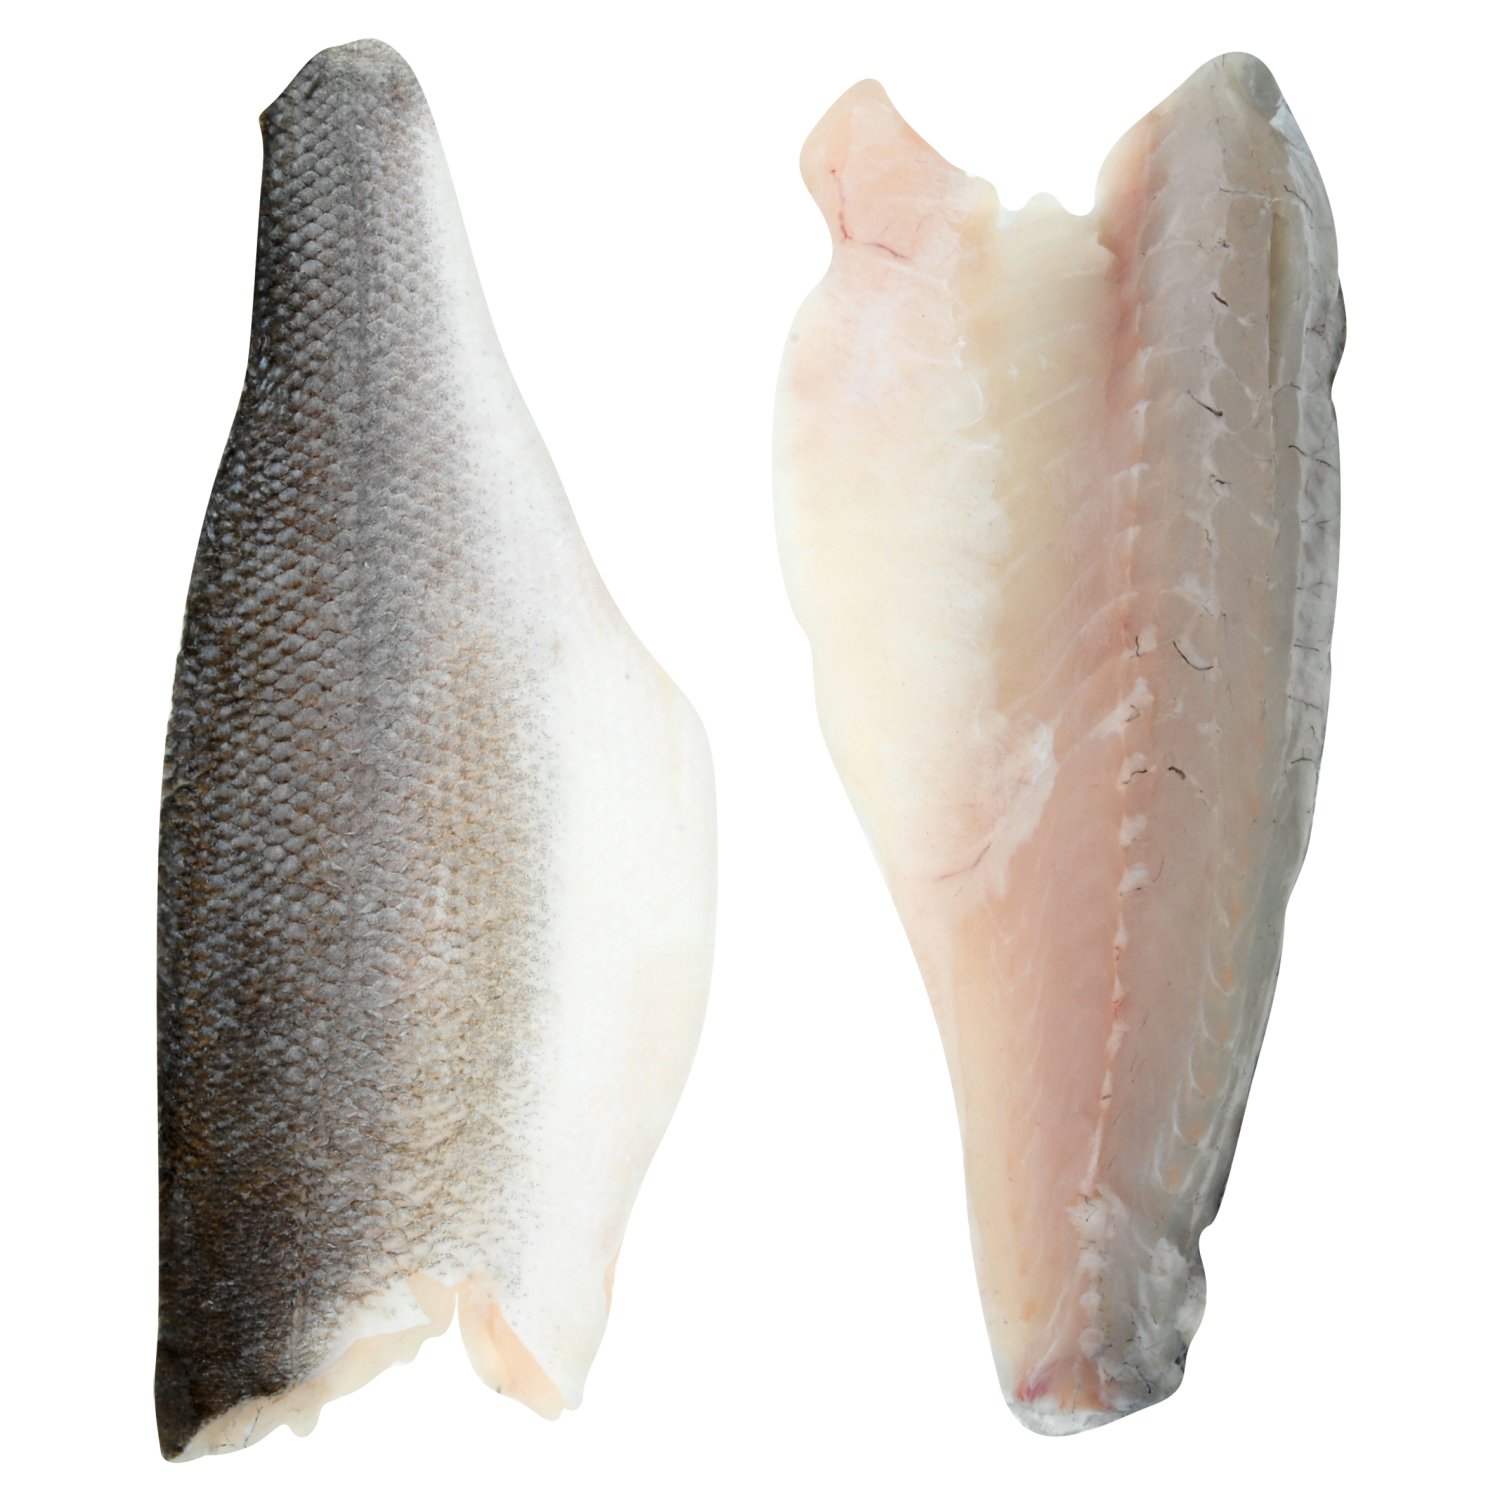 Sea Bass Fillets [S/O 2 For €6.00] (100 g)